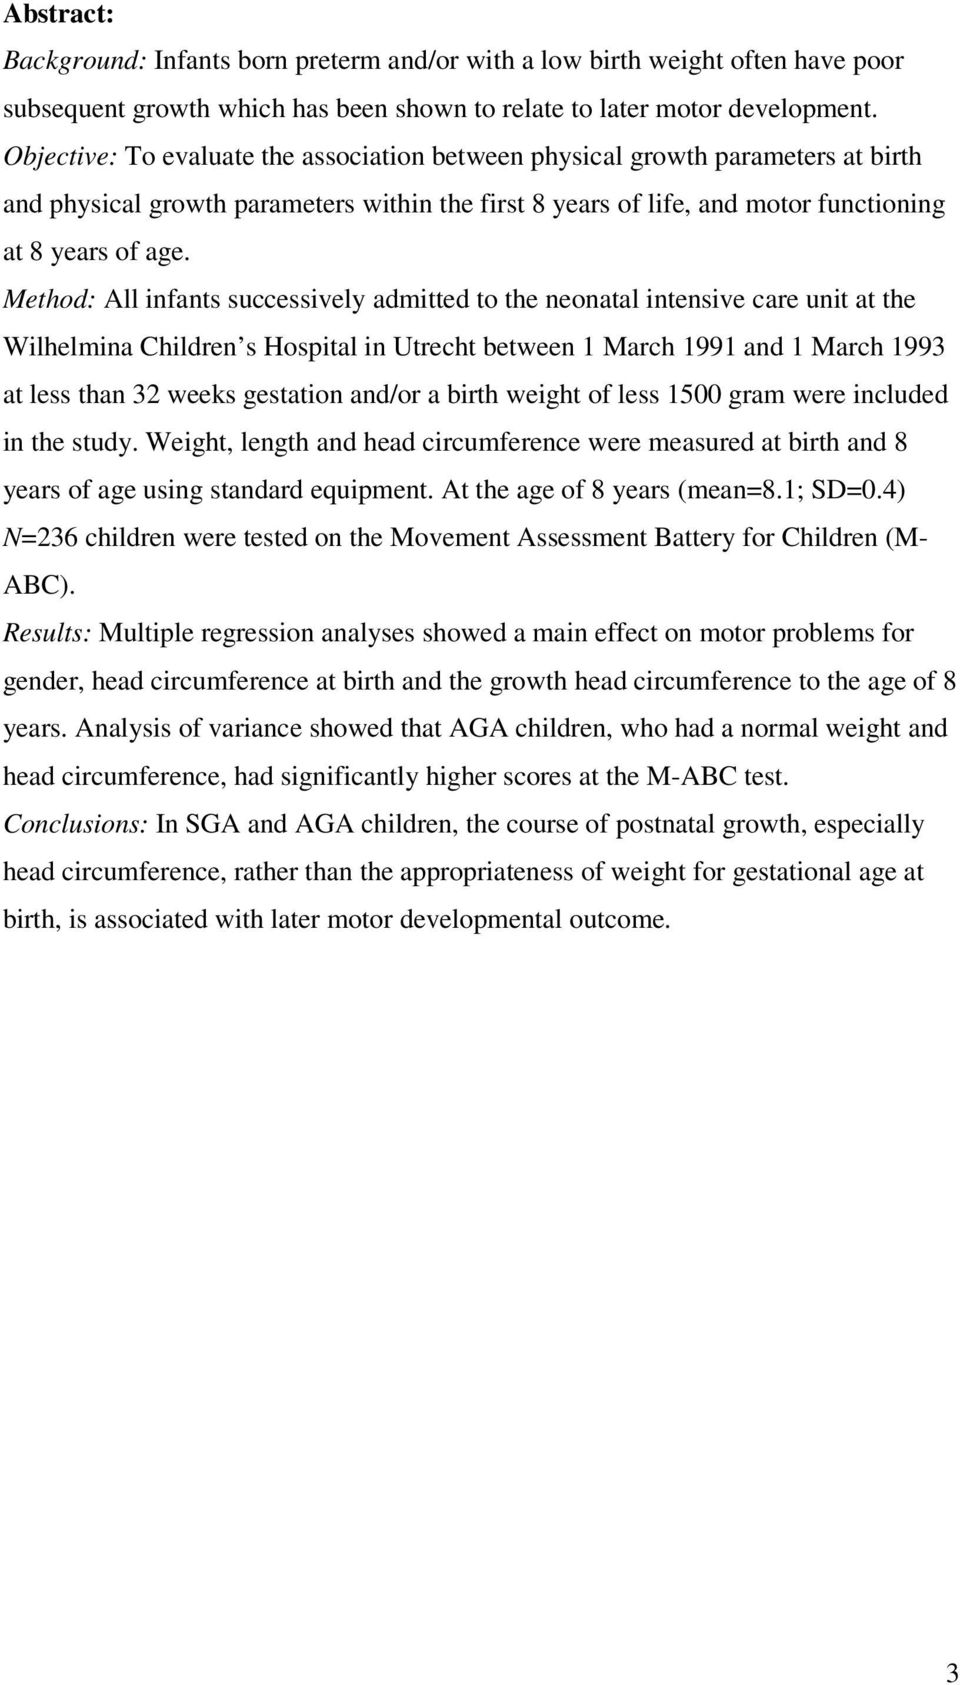 Method: All infants successively admitted to the neonatal intensive care unit at the Wilhelmina Children s Hospital in Utrecht between 1 March 1991 and 1 March 1993 at less than 32 weeks gestation